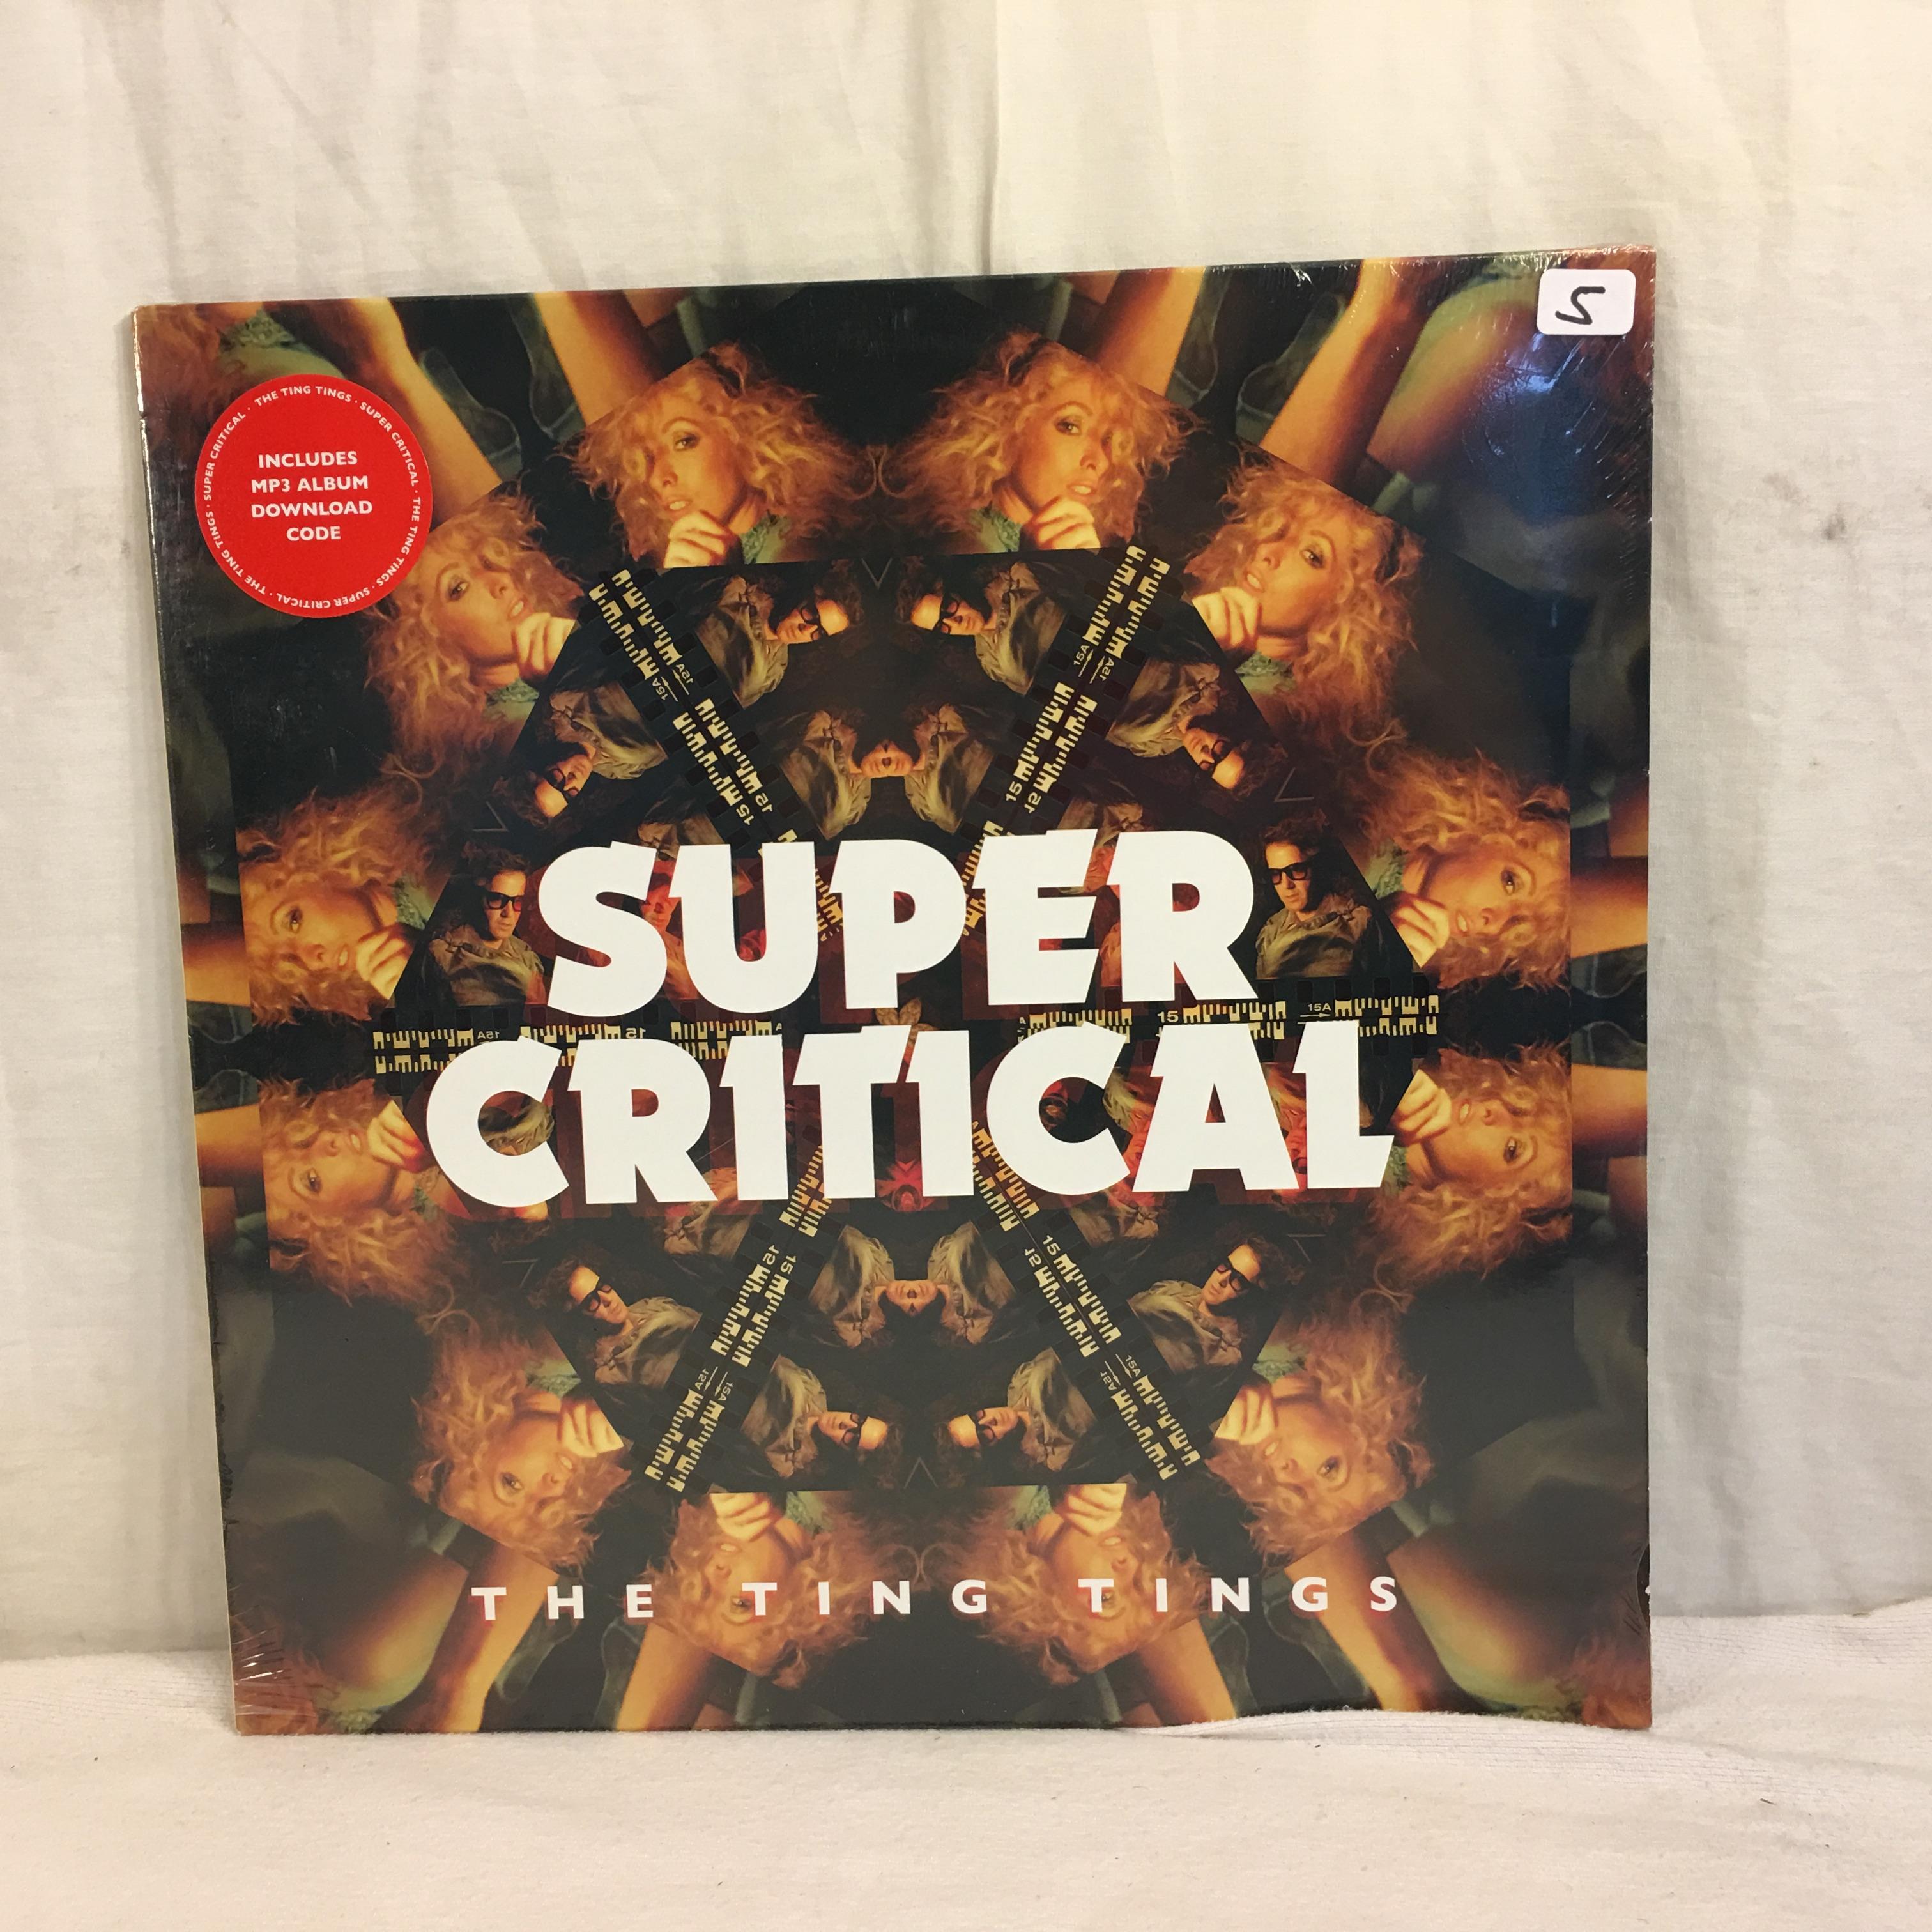 Collector New Sealed 2014 Finca Records Super Critical The Ting Tings Vinyl Record Album